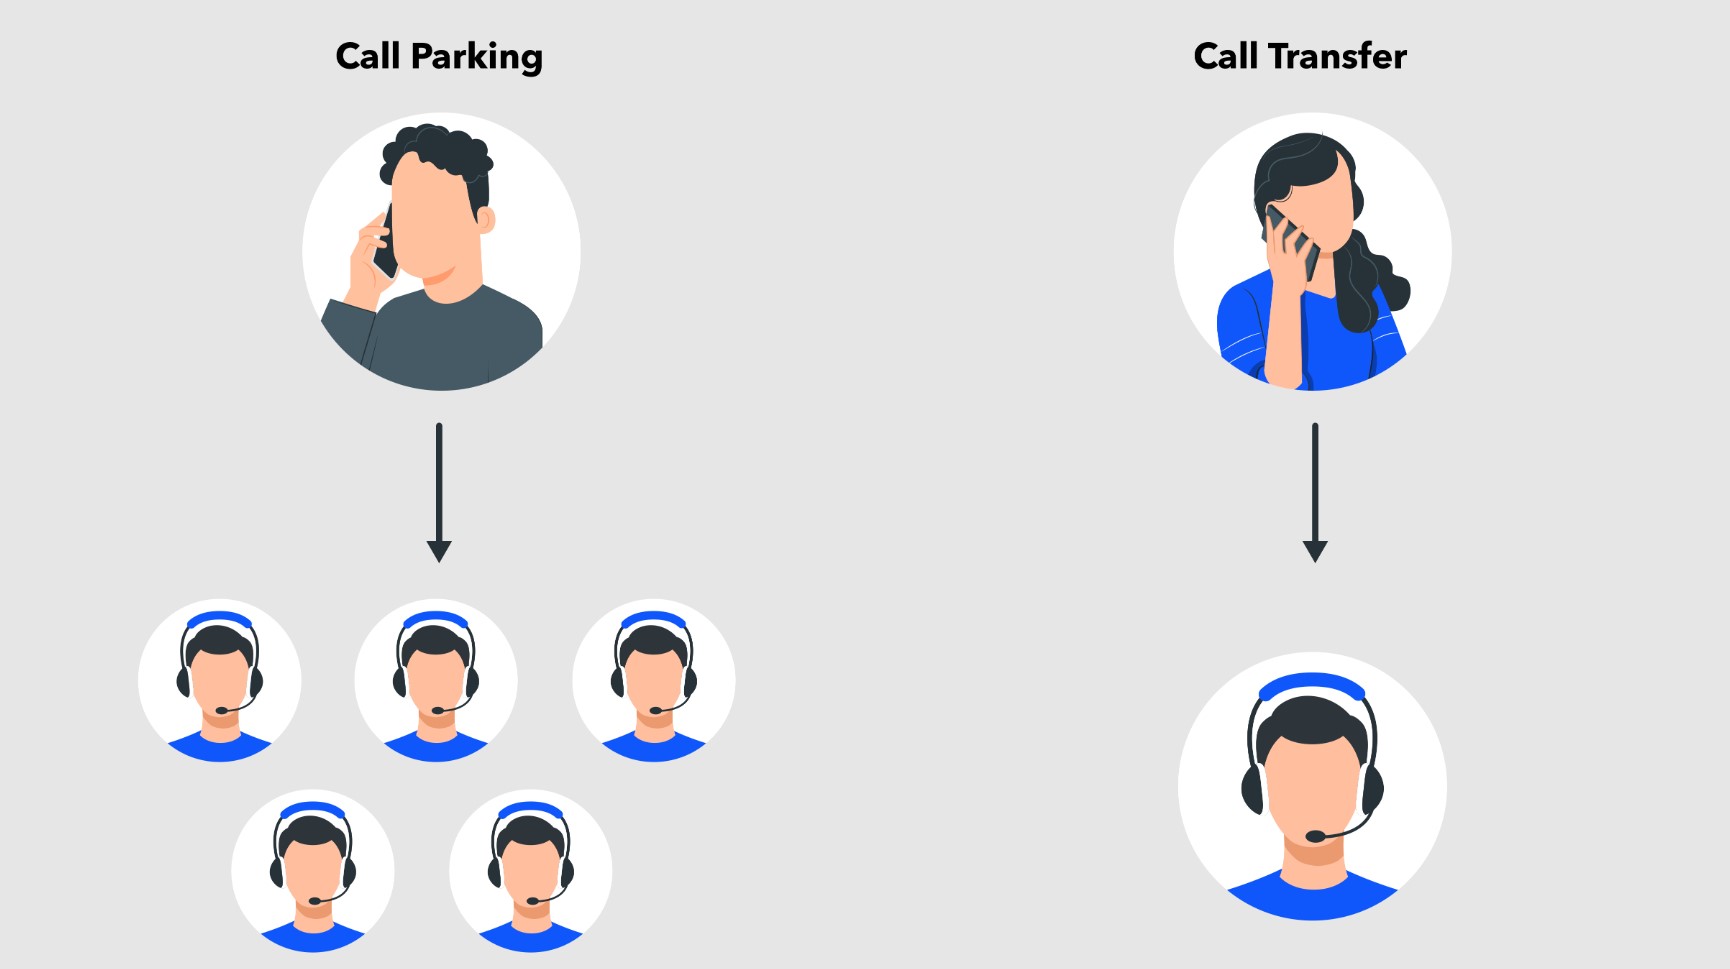 How Call Parking Works